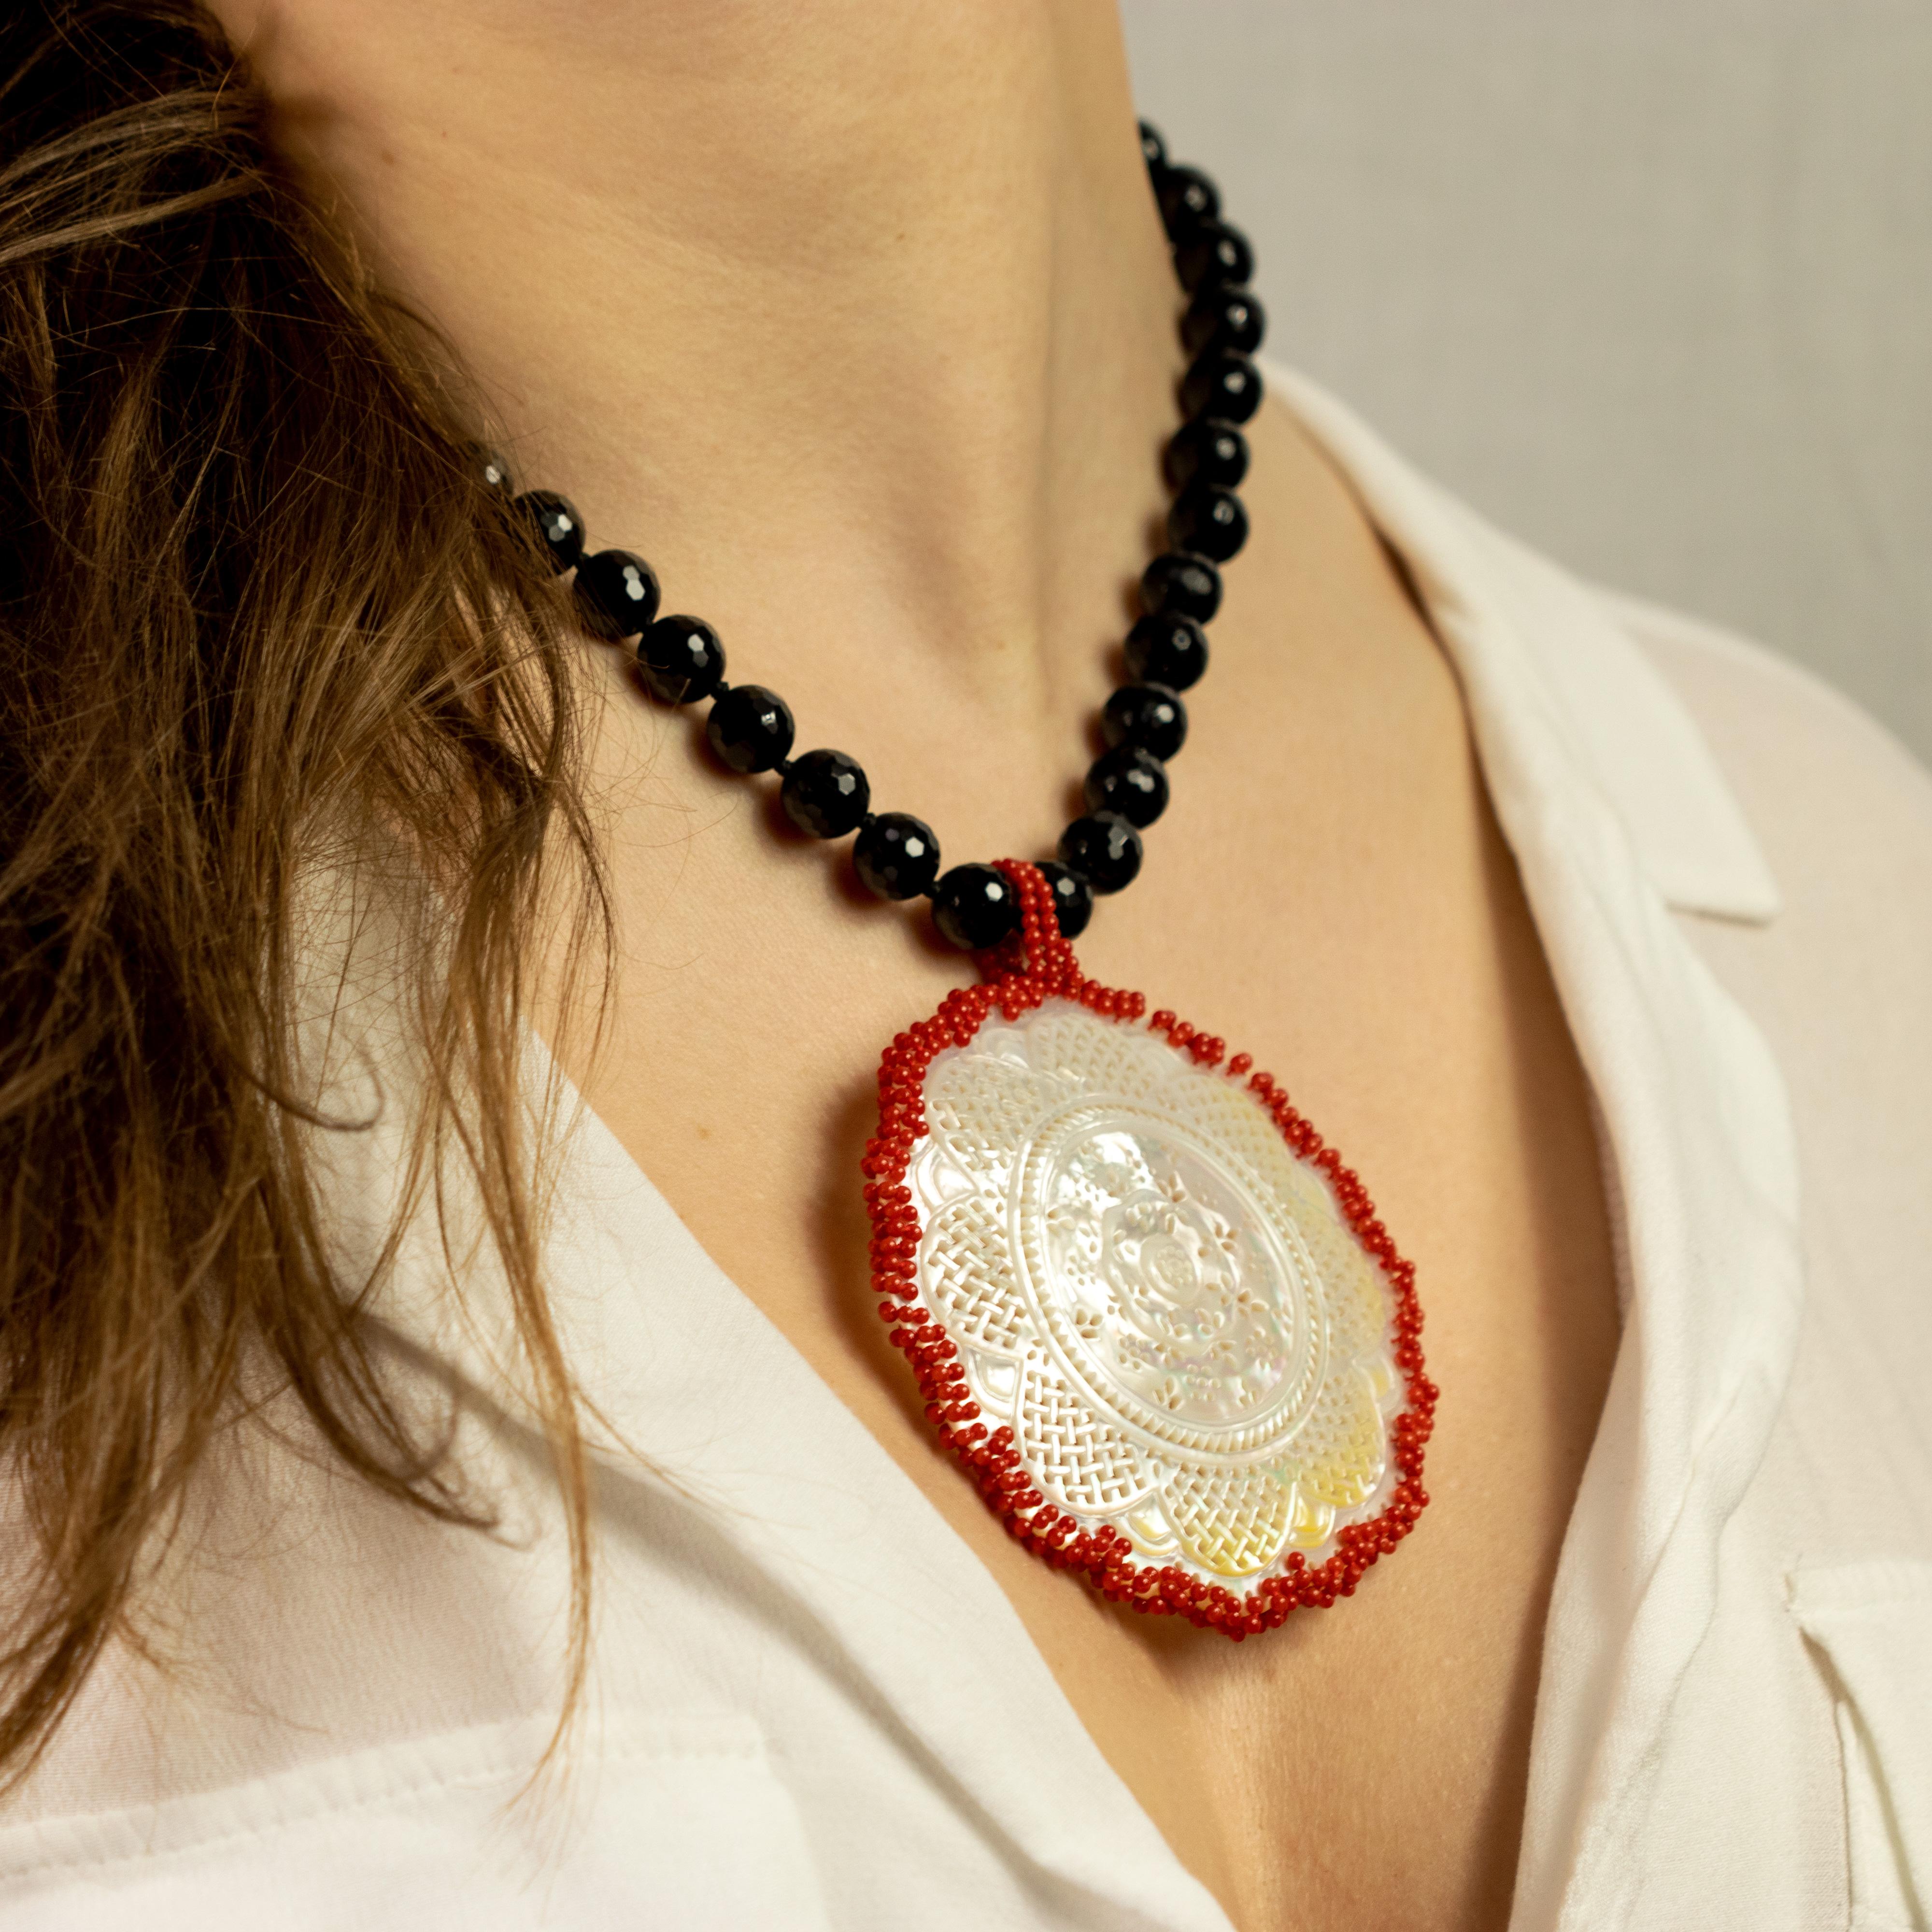 Artistic piece in faceted black agate with a central mother of pearl medallion outlined by a red coral frame.

In the ancient Asian story says that there were a couple of lovers, so in love that they used to build mother of pearl medallions and hid